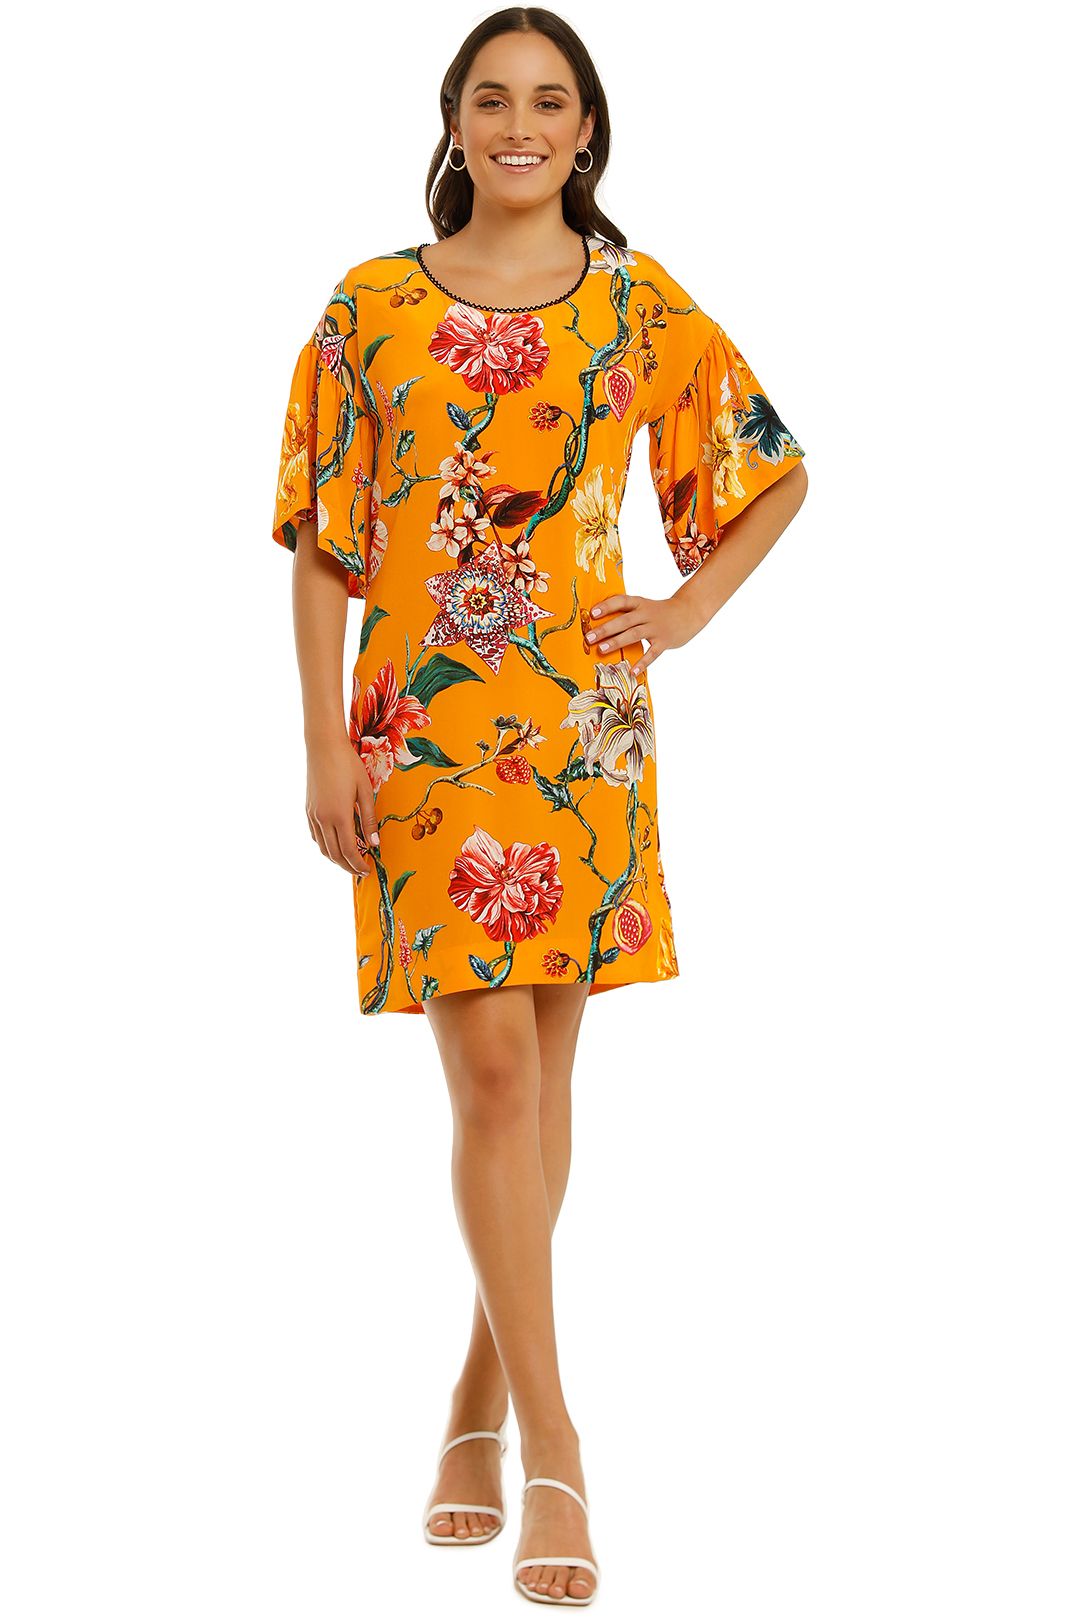 Trelise-Cooper-Nice-To-Sweet-You Tunic-Mango-Floral-Front